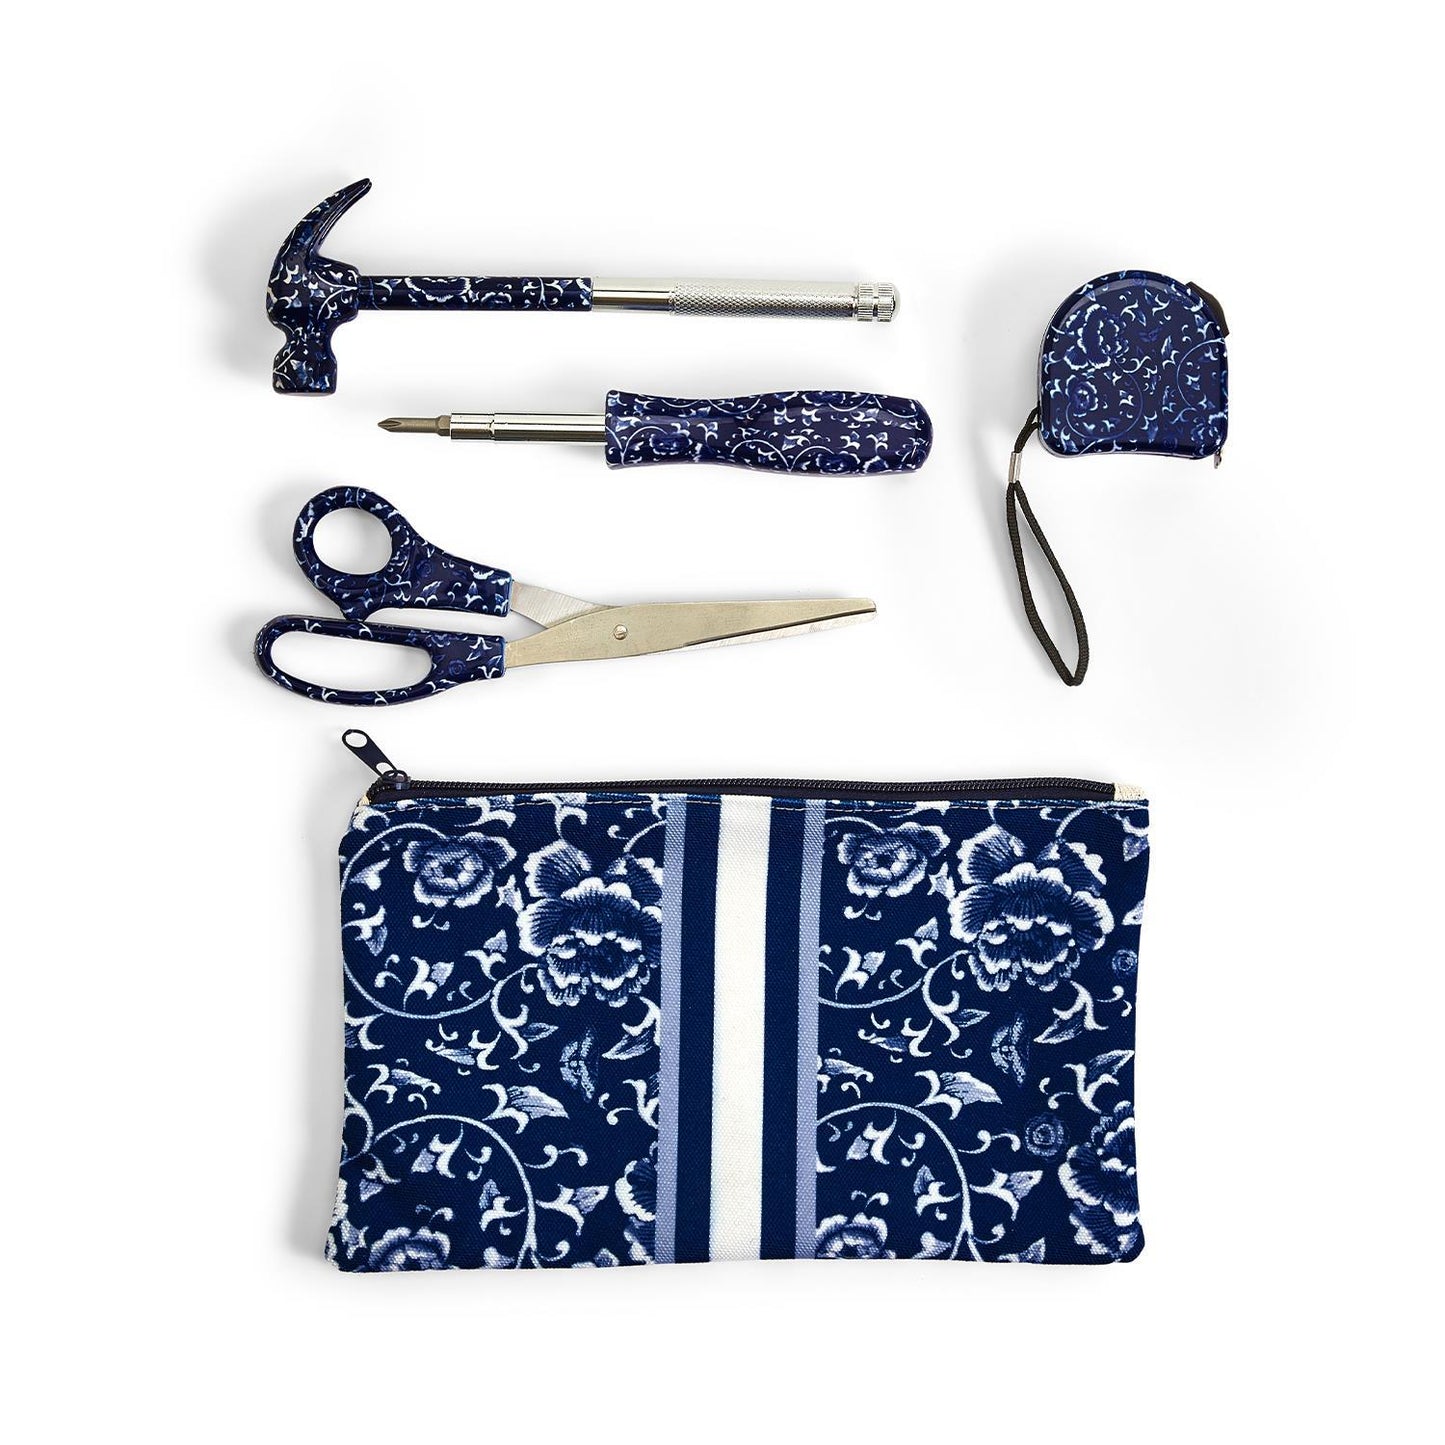 Chinoiserie Floral Pattern Tool Set in Storage Pouch Includes: Scissor, 10 ft Tape Measure, Four-In-One Screwdriver, Hammer with Screwdriver - Iron/Polyester